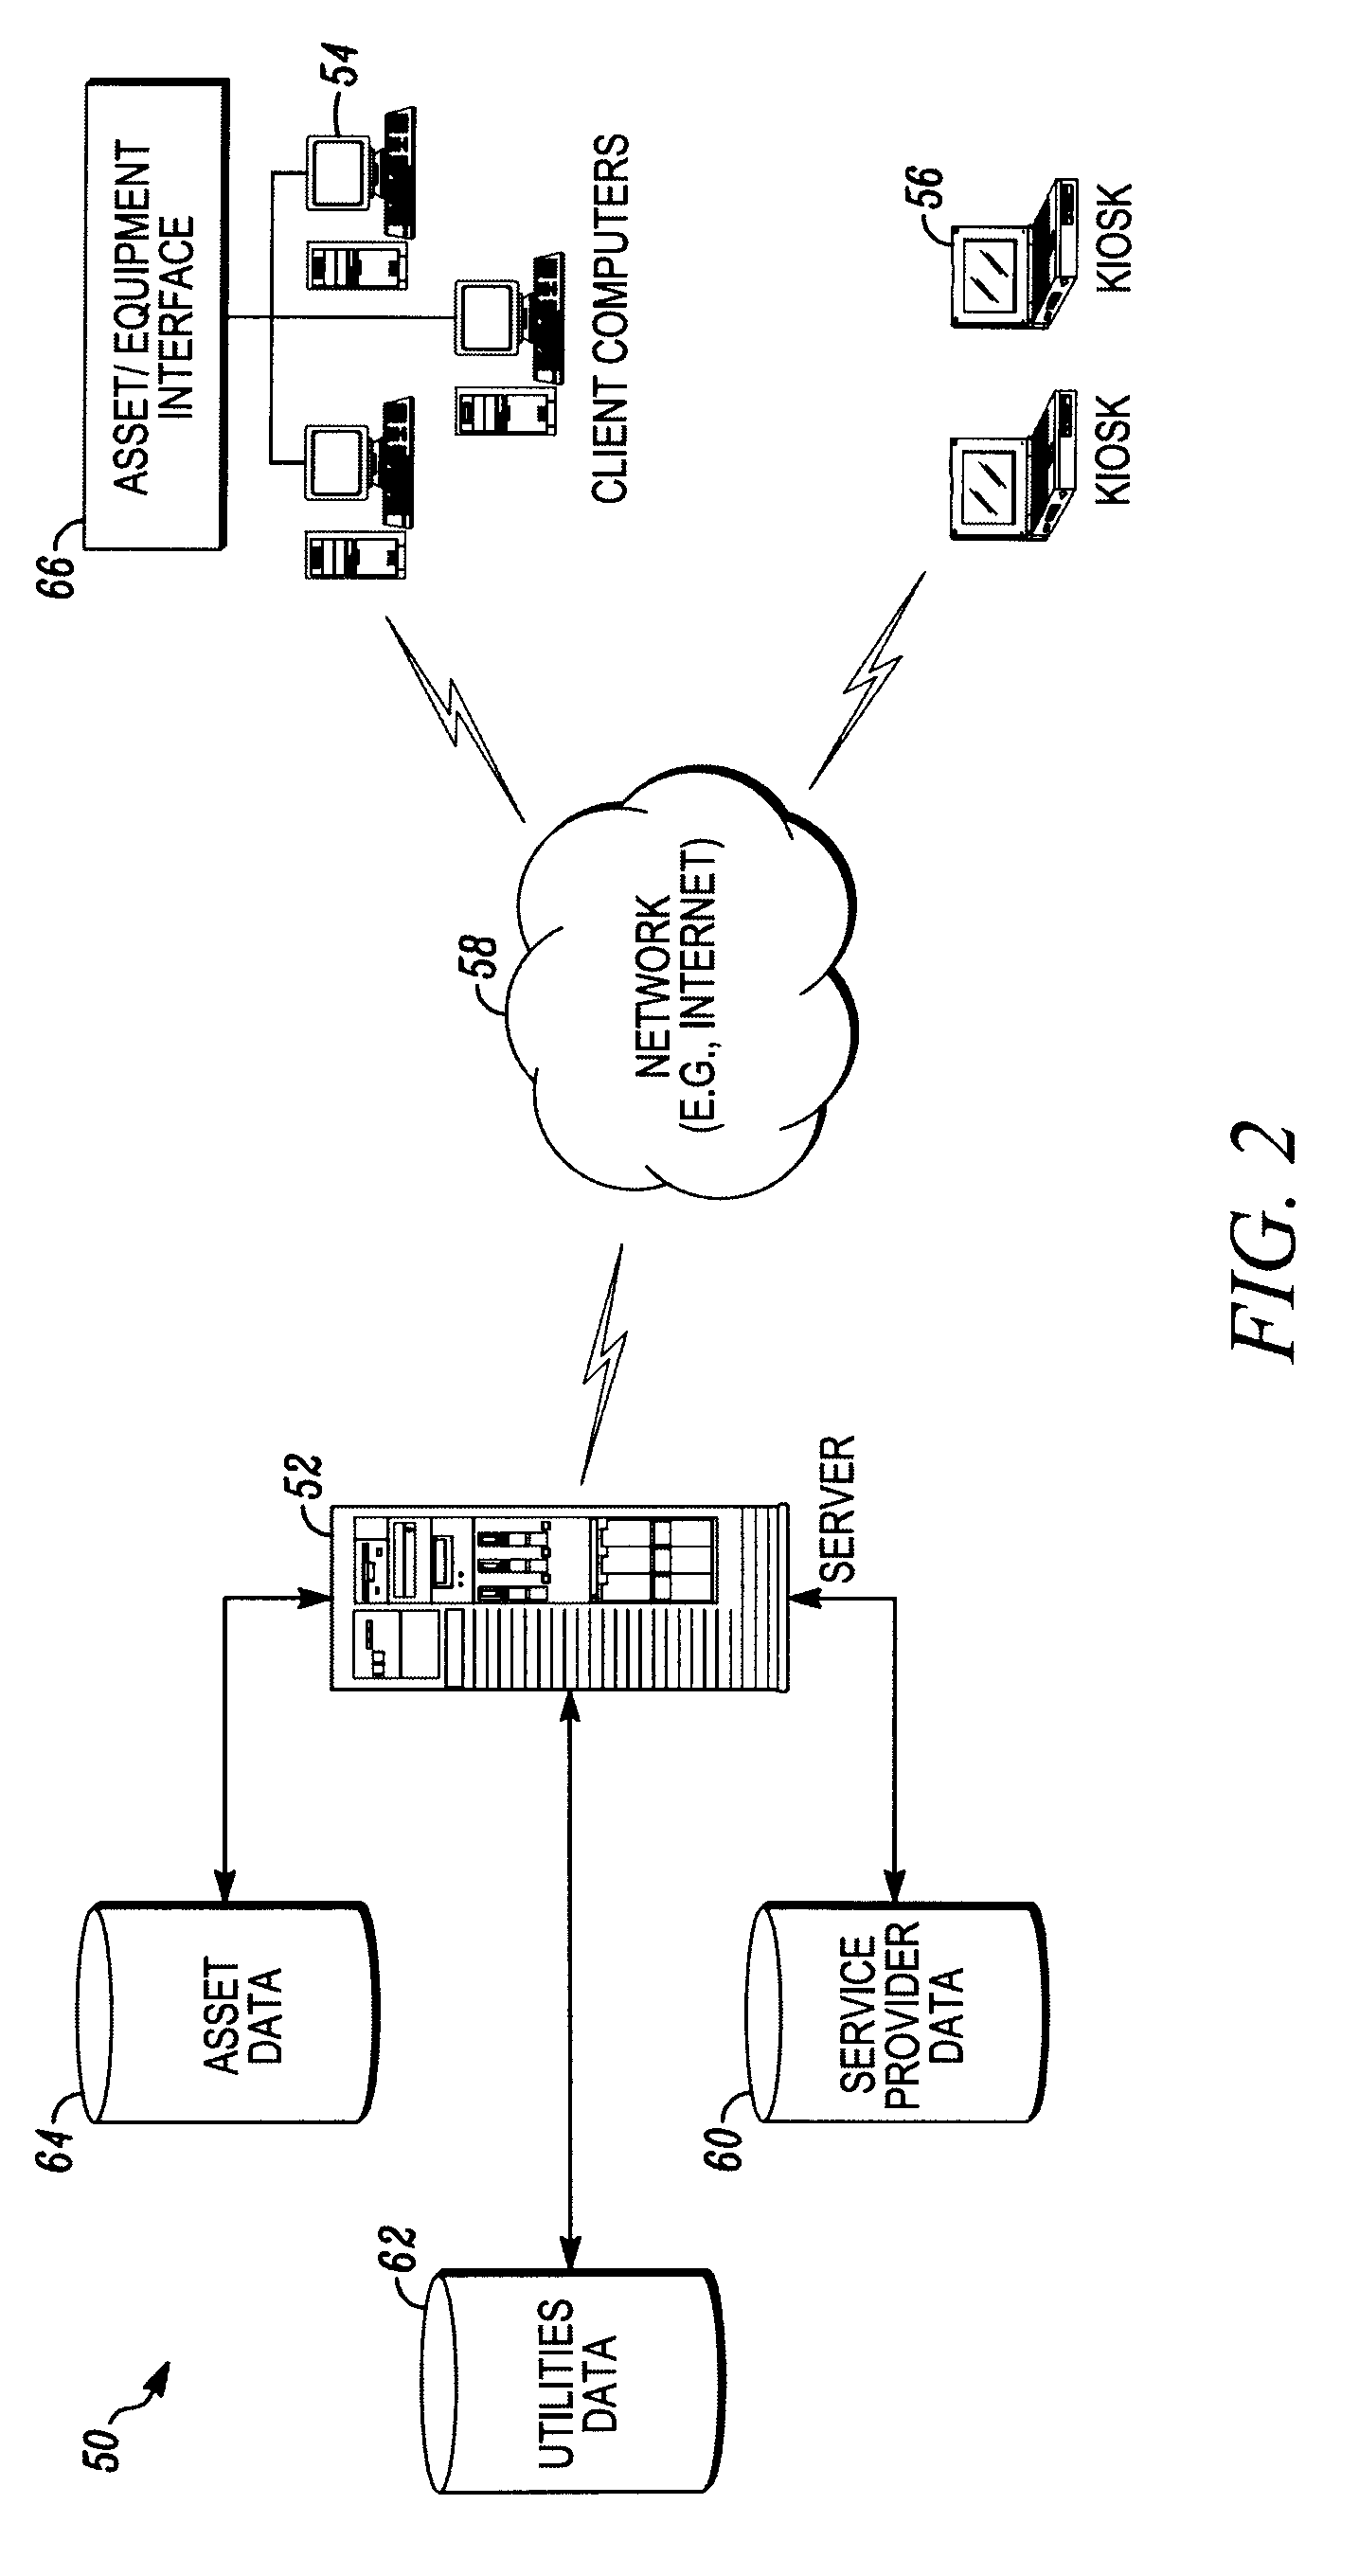 Method and system for tracking and managing various operating parameters of enterprise assets